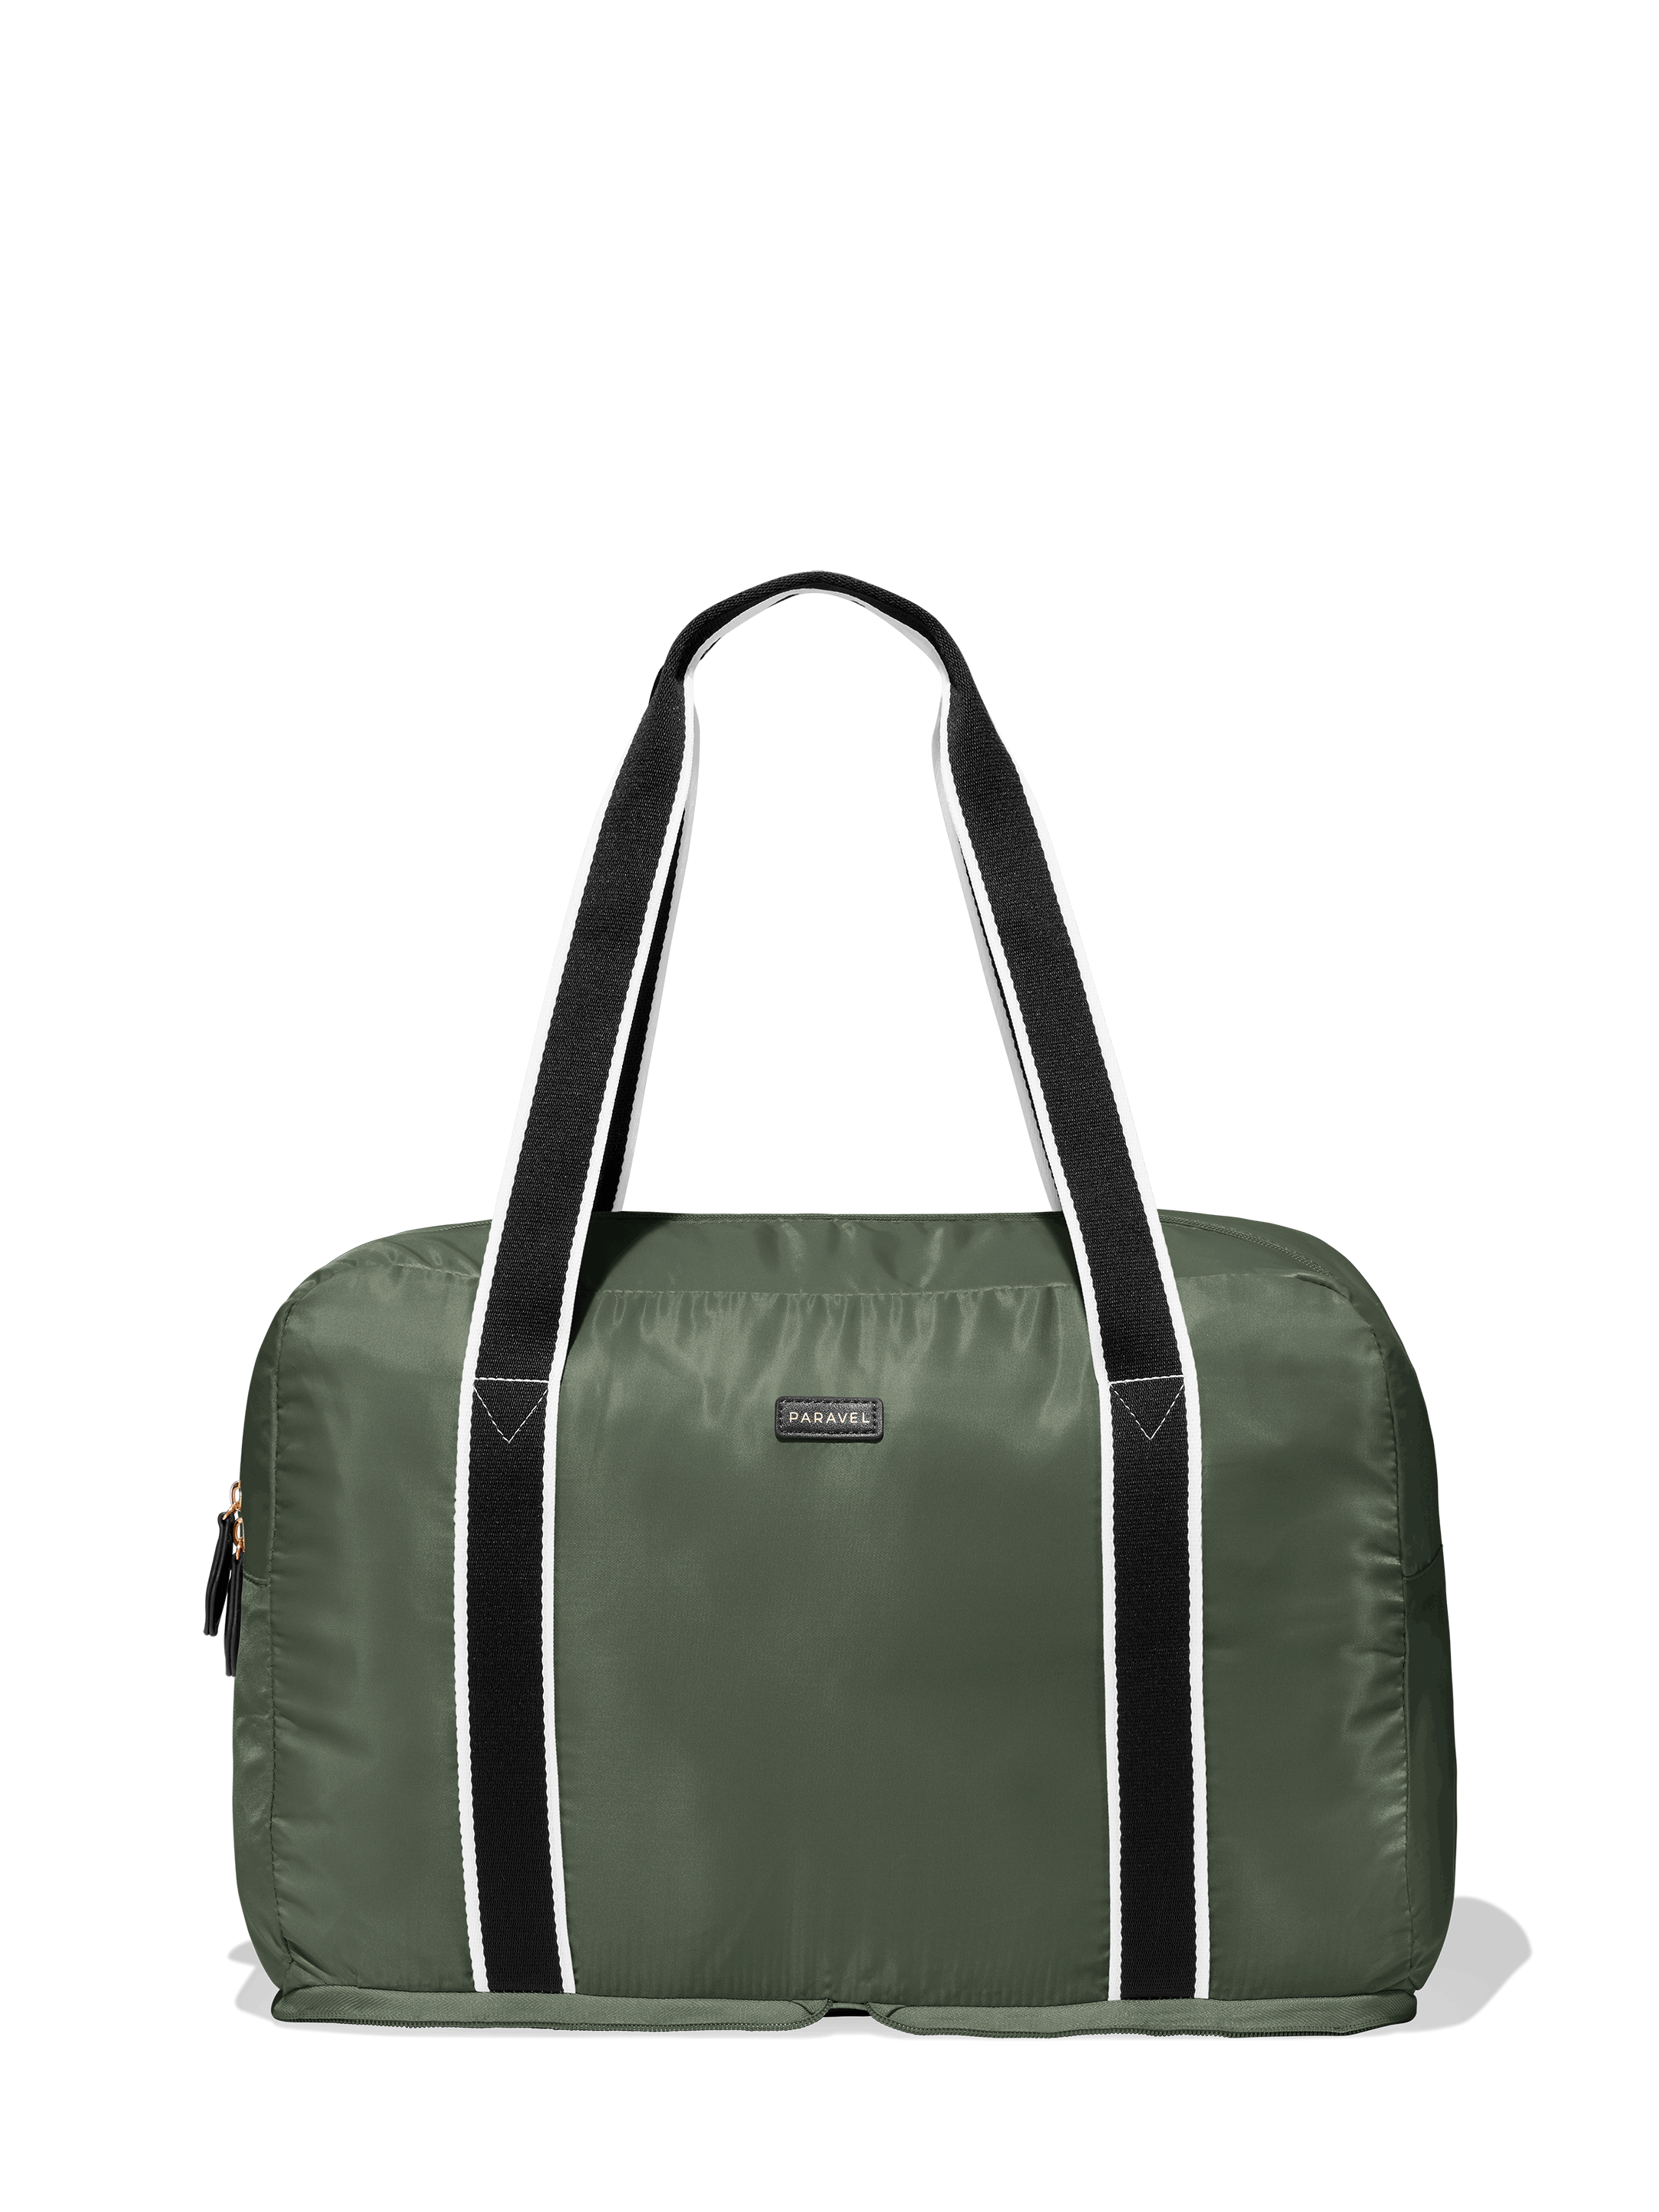 Best Duffle Bag: How To Pick In 2023